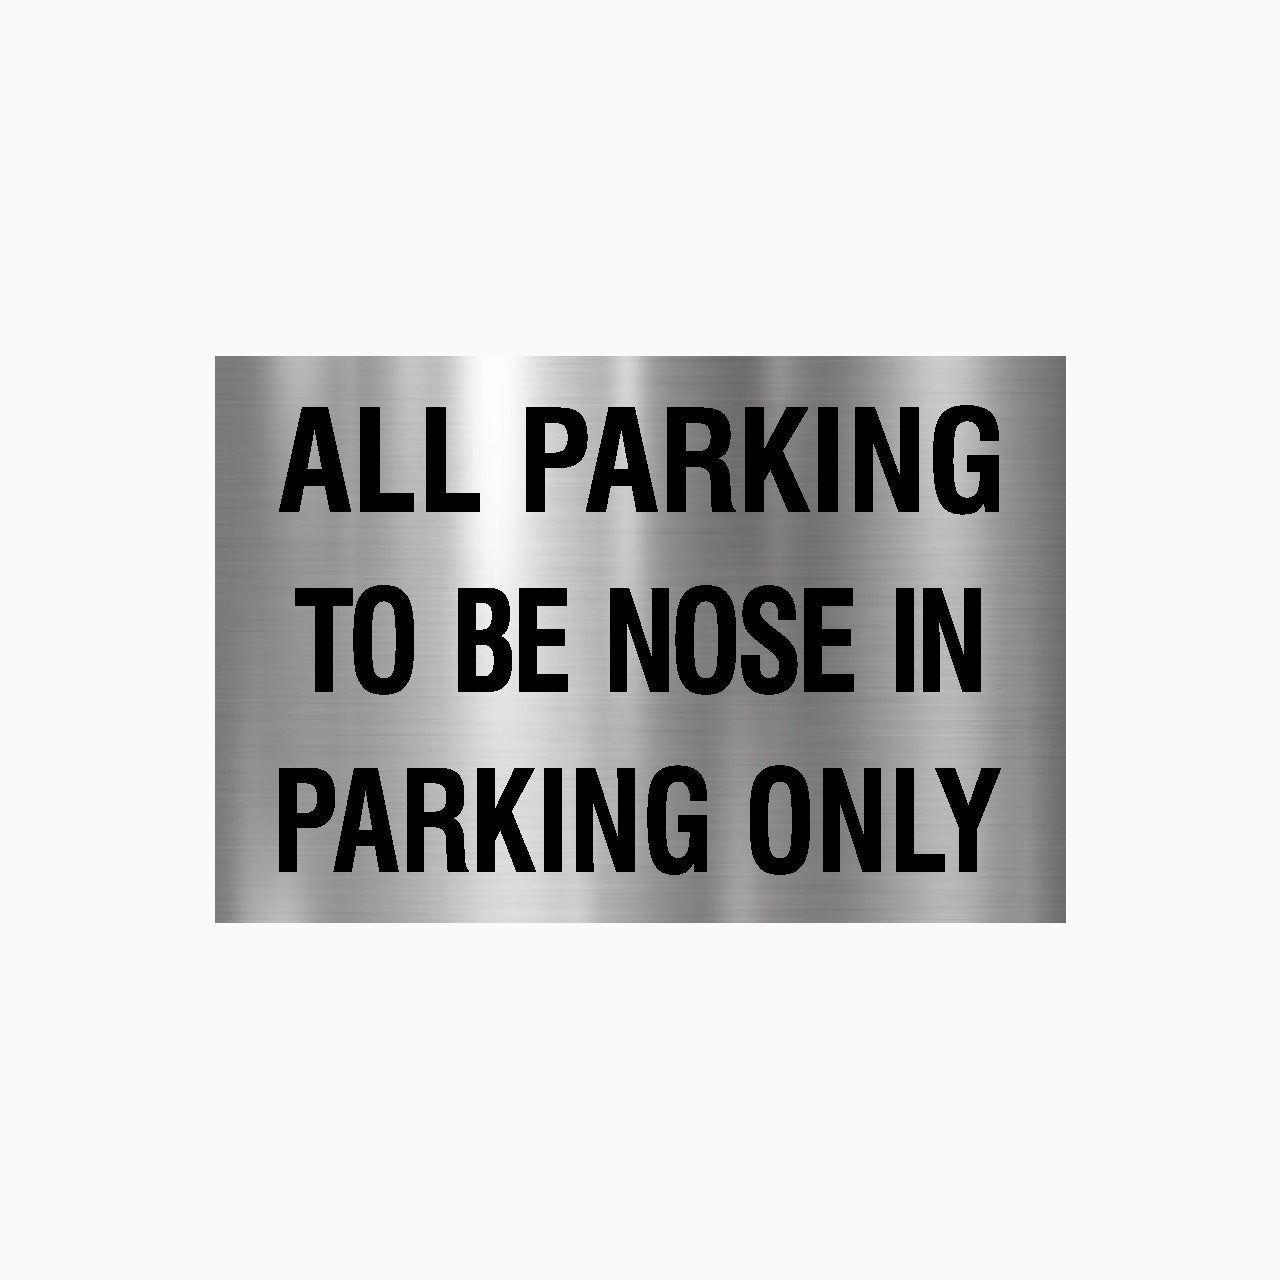 ALL PARKING TO BE NOSE IN PARKING ONLY SIGN - Statutory Signs